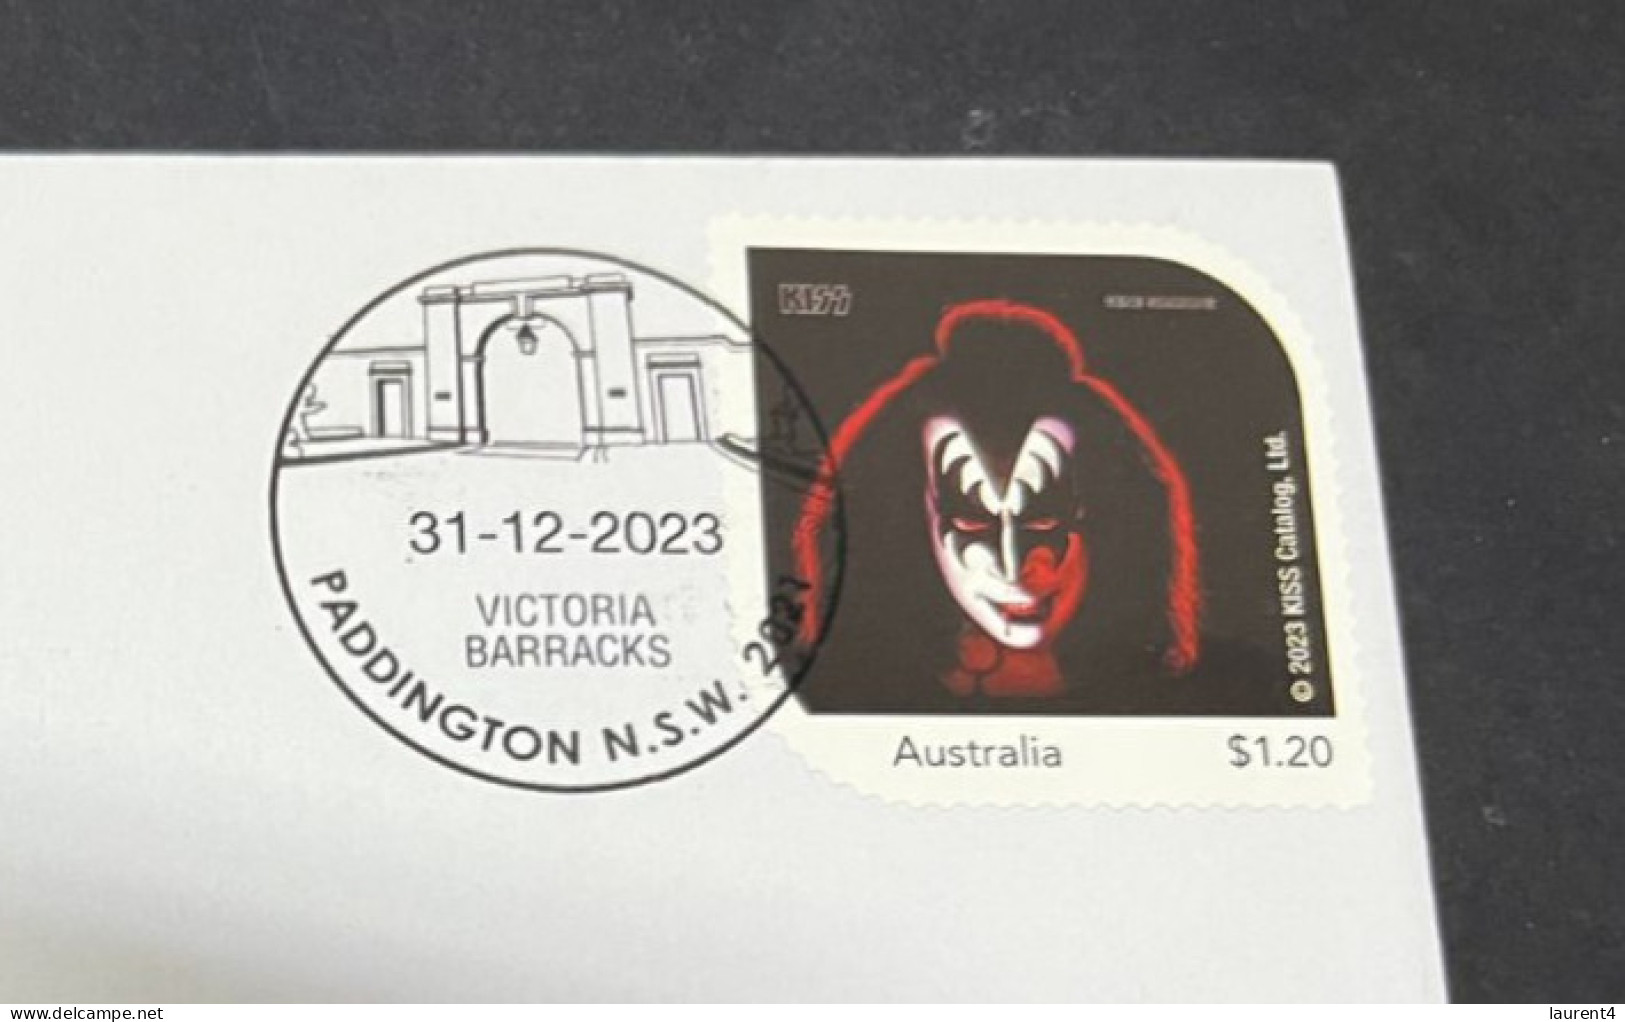 26-3-20234 (4 Y 8) Kiss (music Band) With KISS OZ Stamp (Gene Simmons) - Music